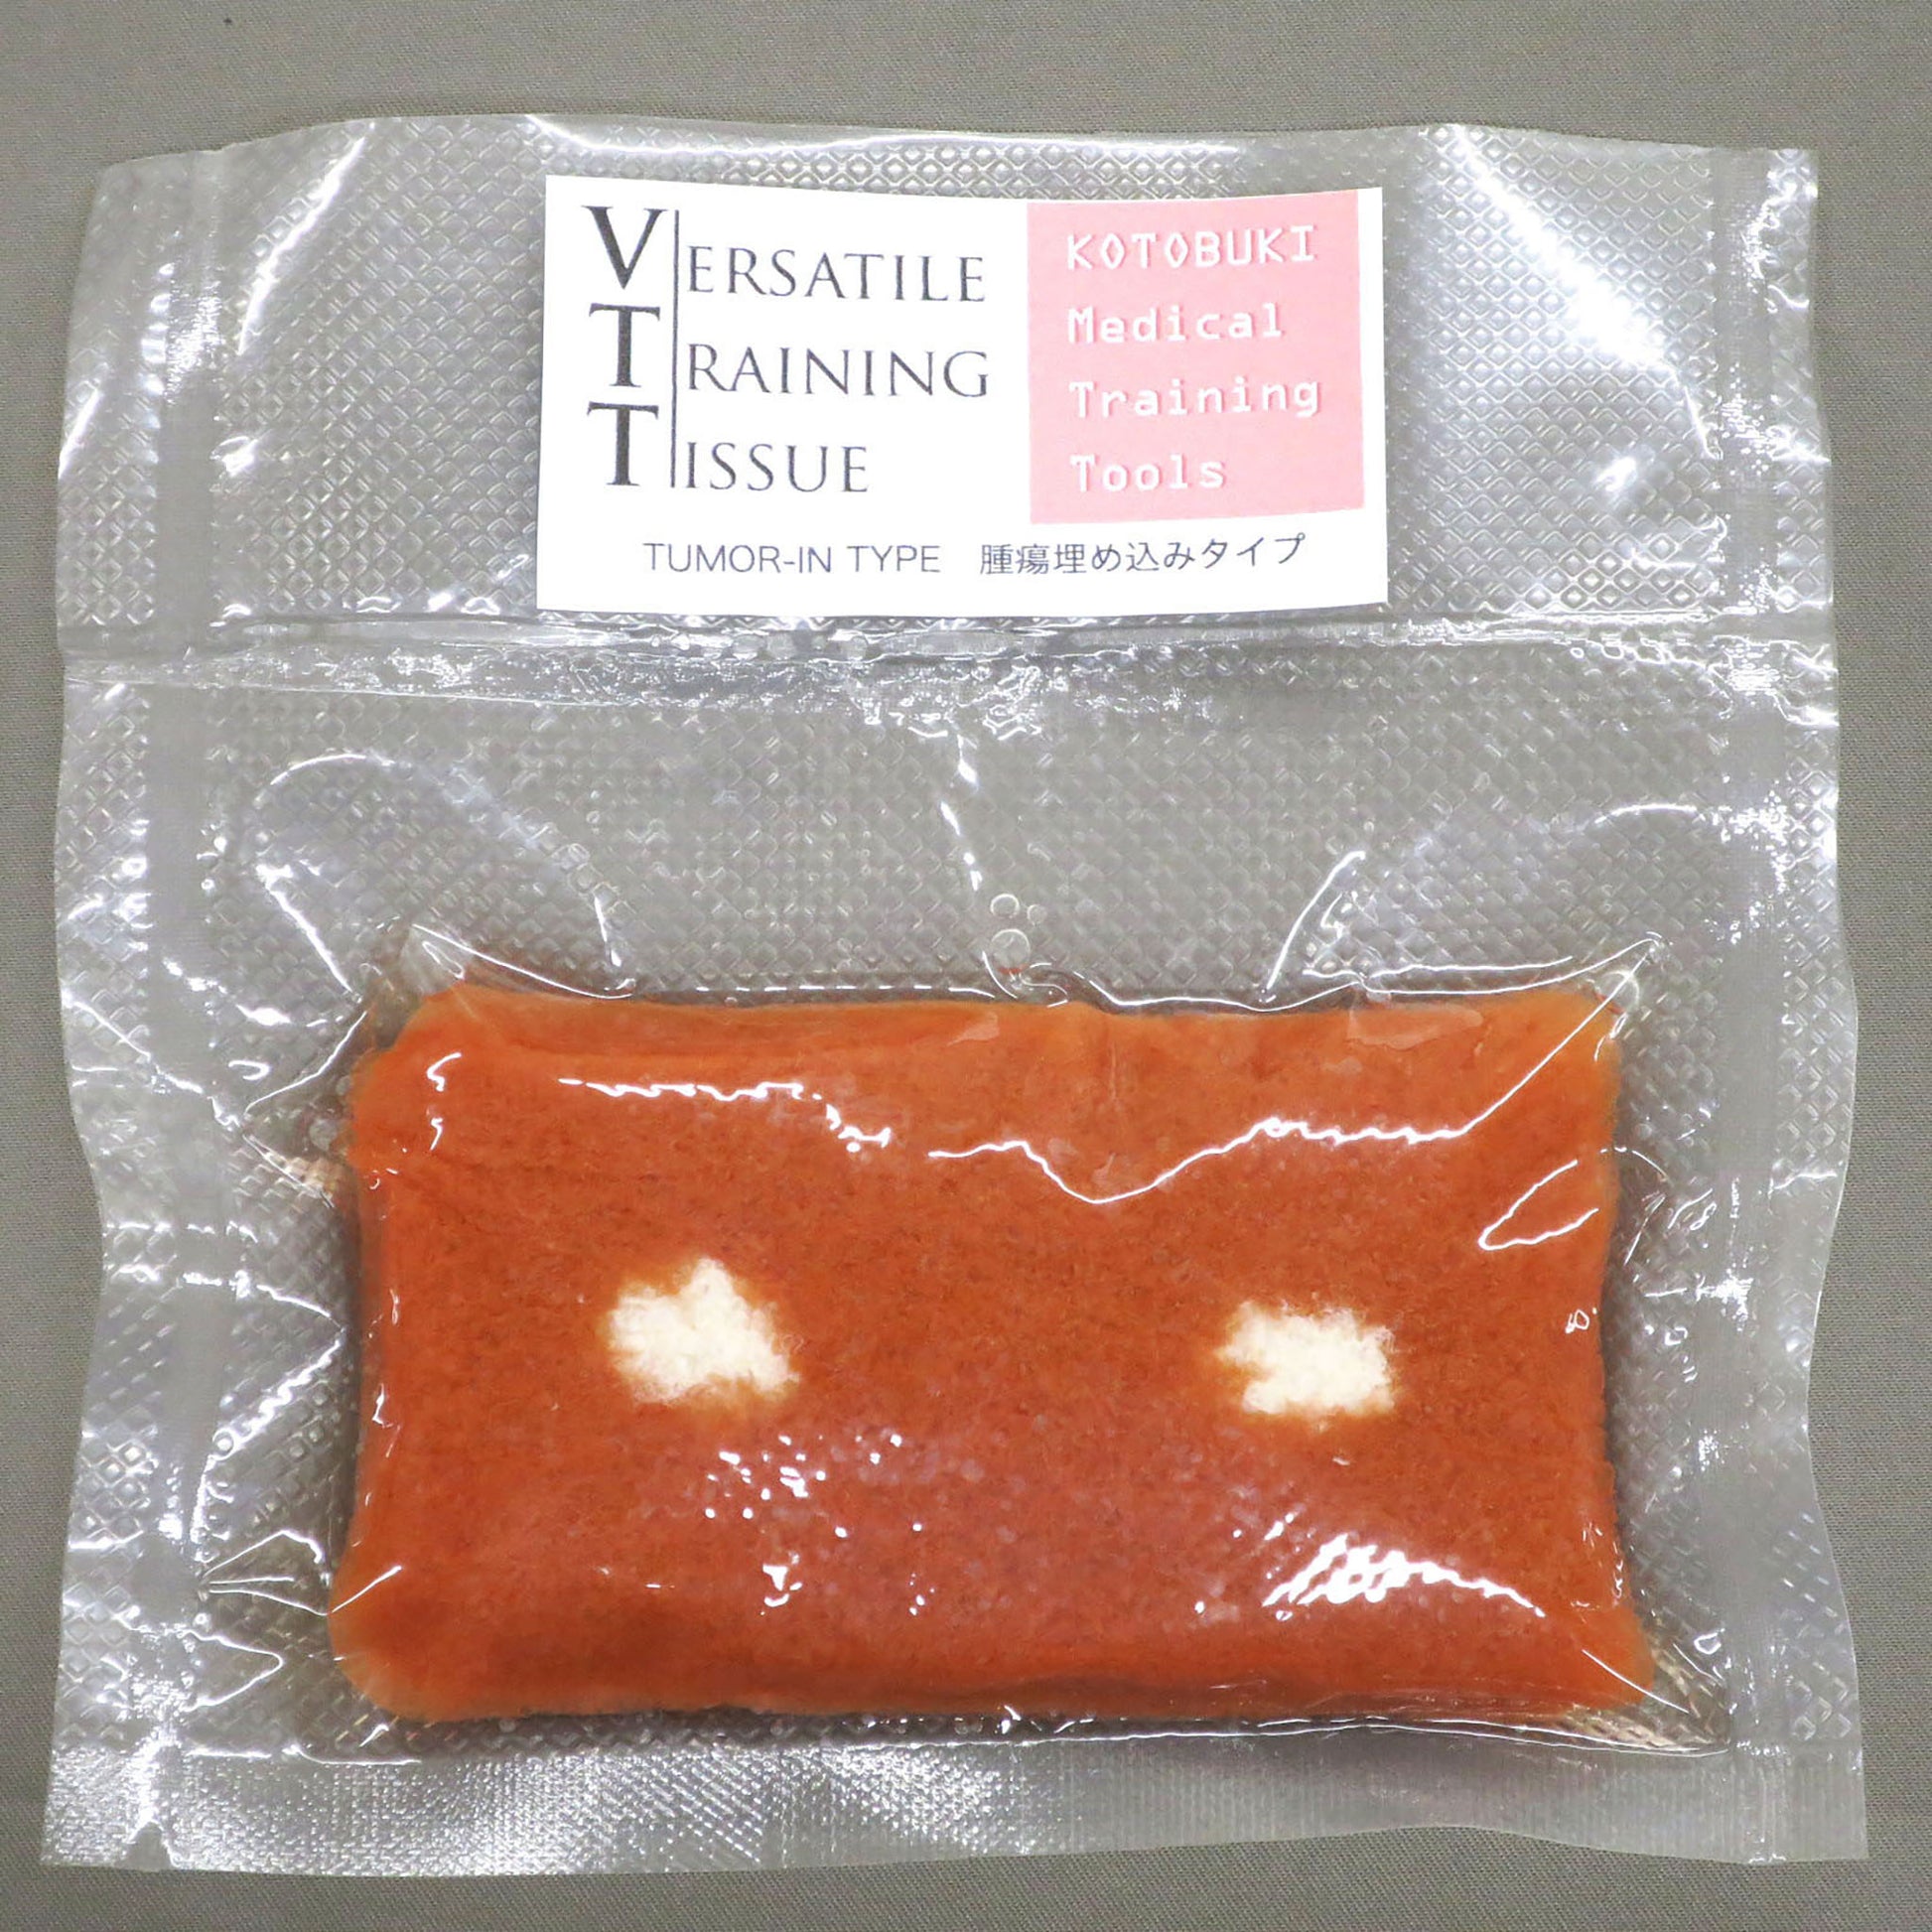 The VTT Tumor Type in its shrink-wrapped packaging against a gray background. 